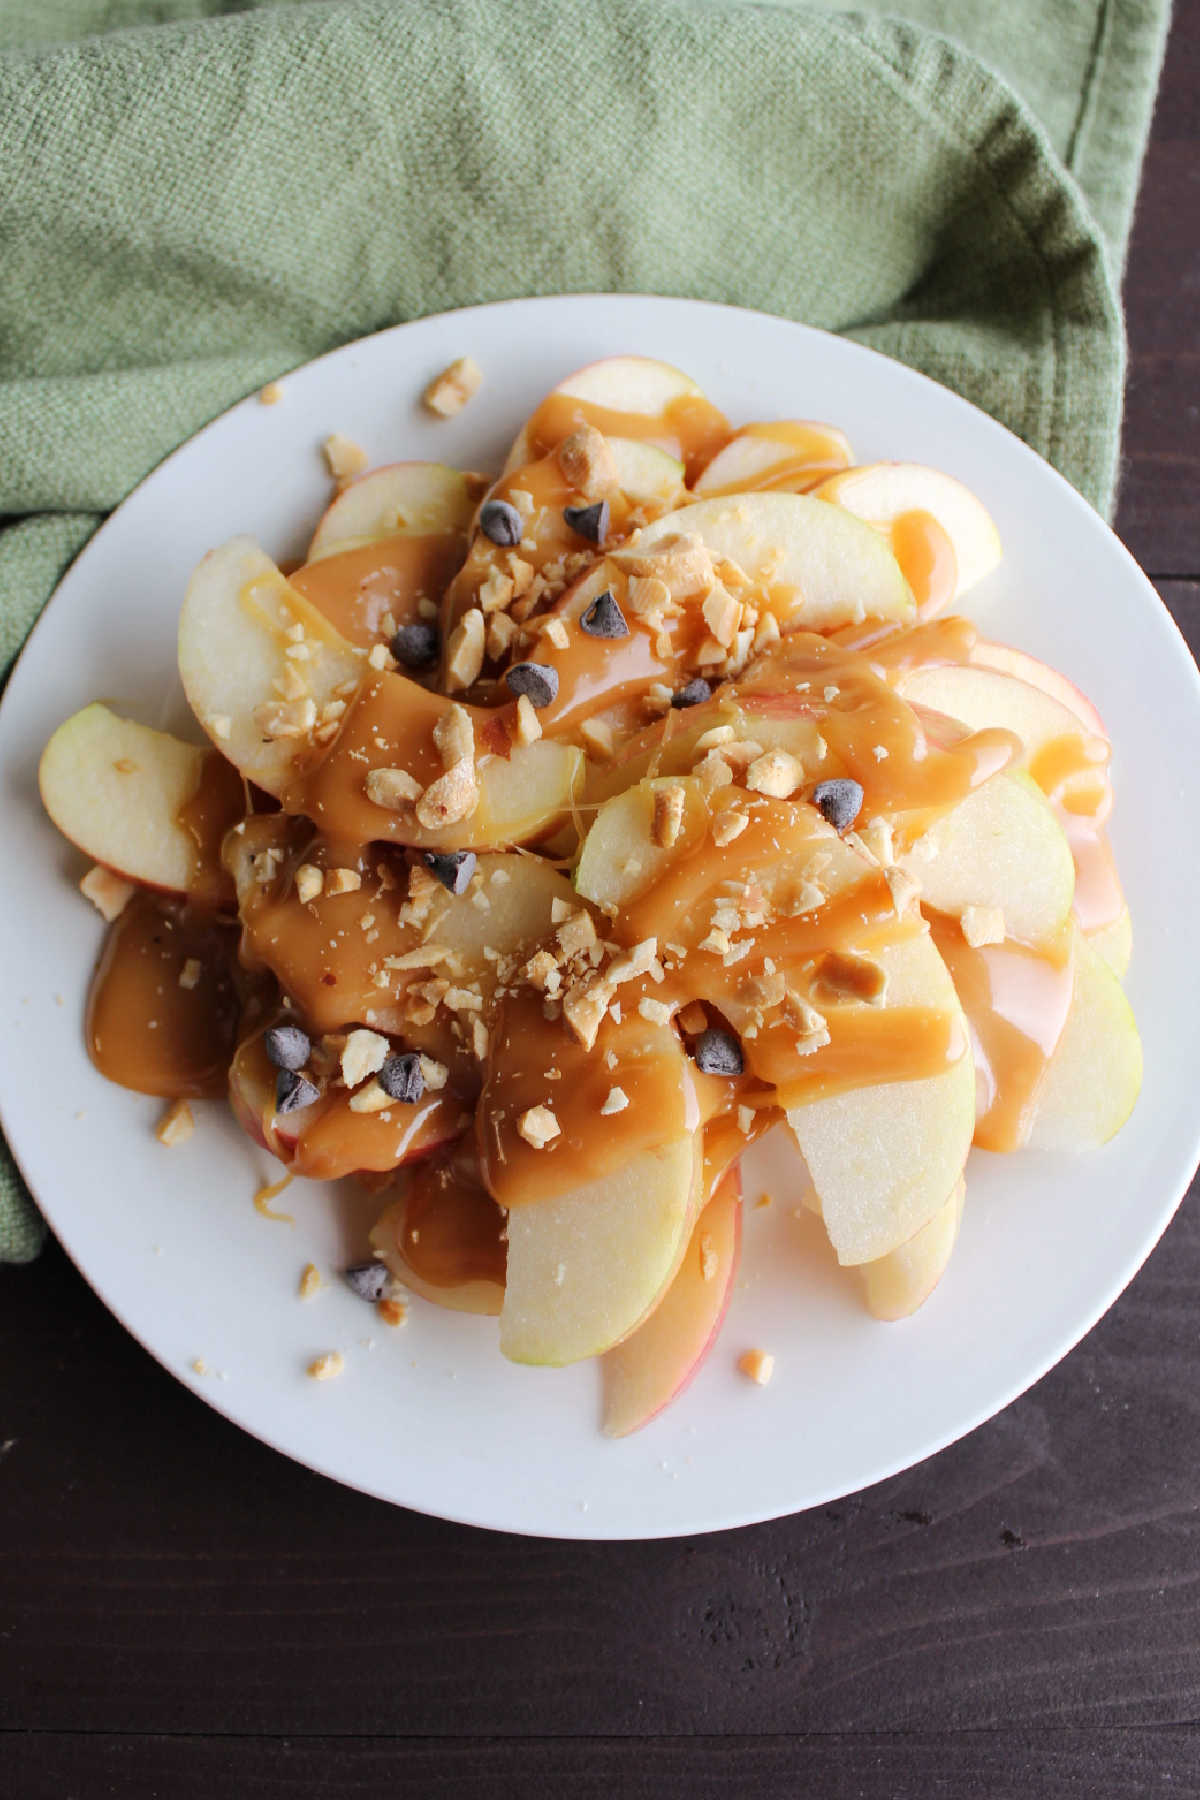 Plate of apple slices topped with caramel sauce, mini chocolate chips and chopped peanuts to make apple nachos.